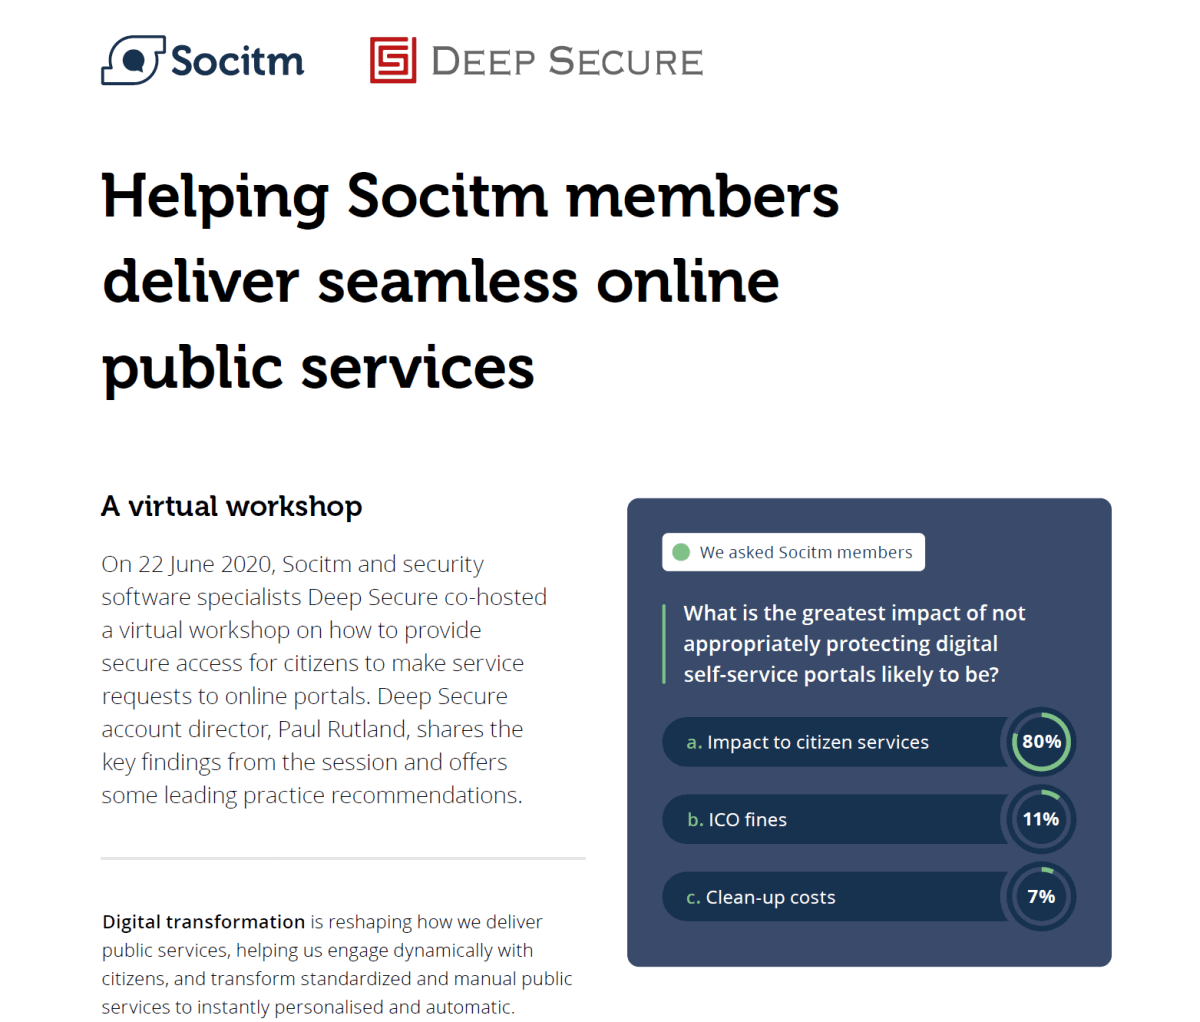 Helping Socitm members deliver seamless online public services